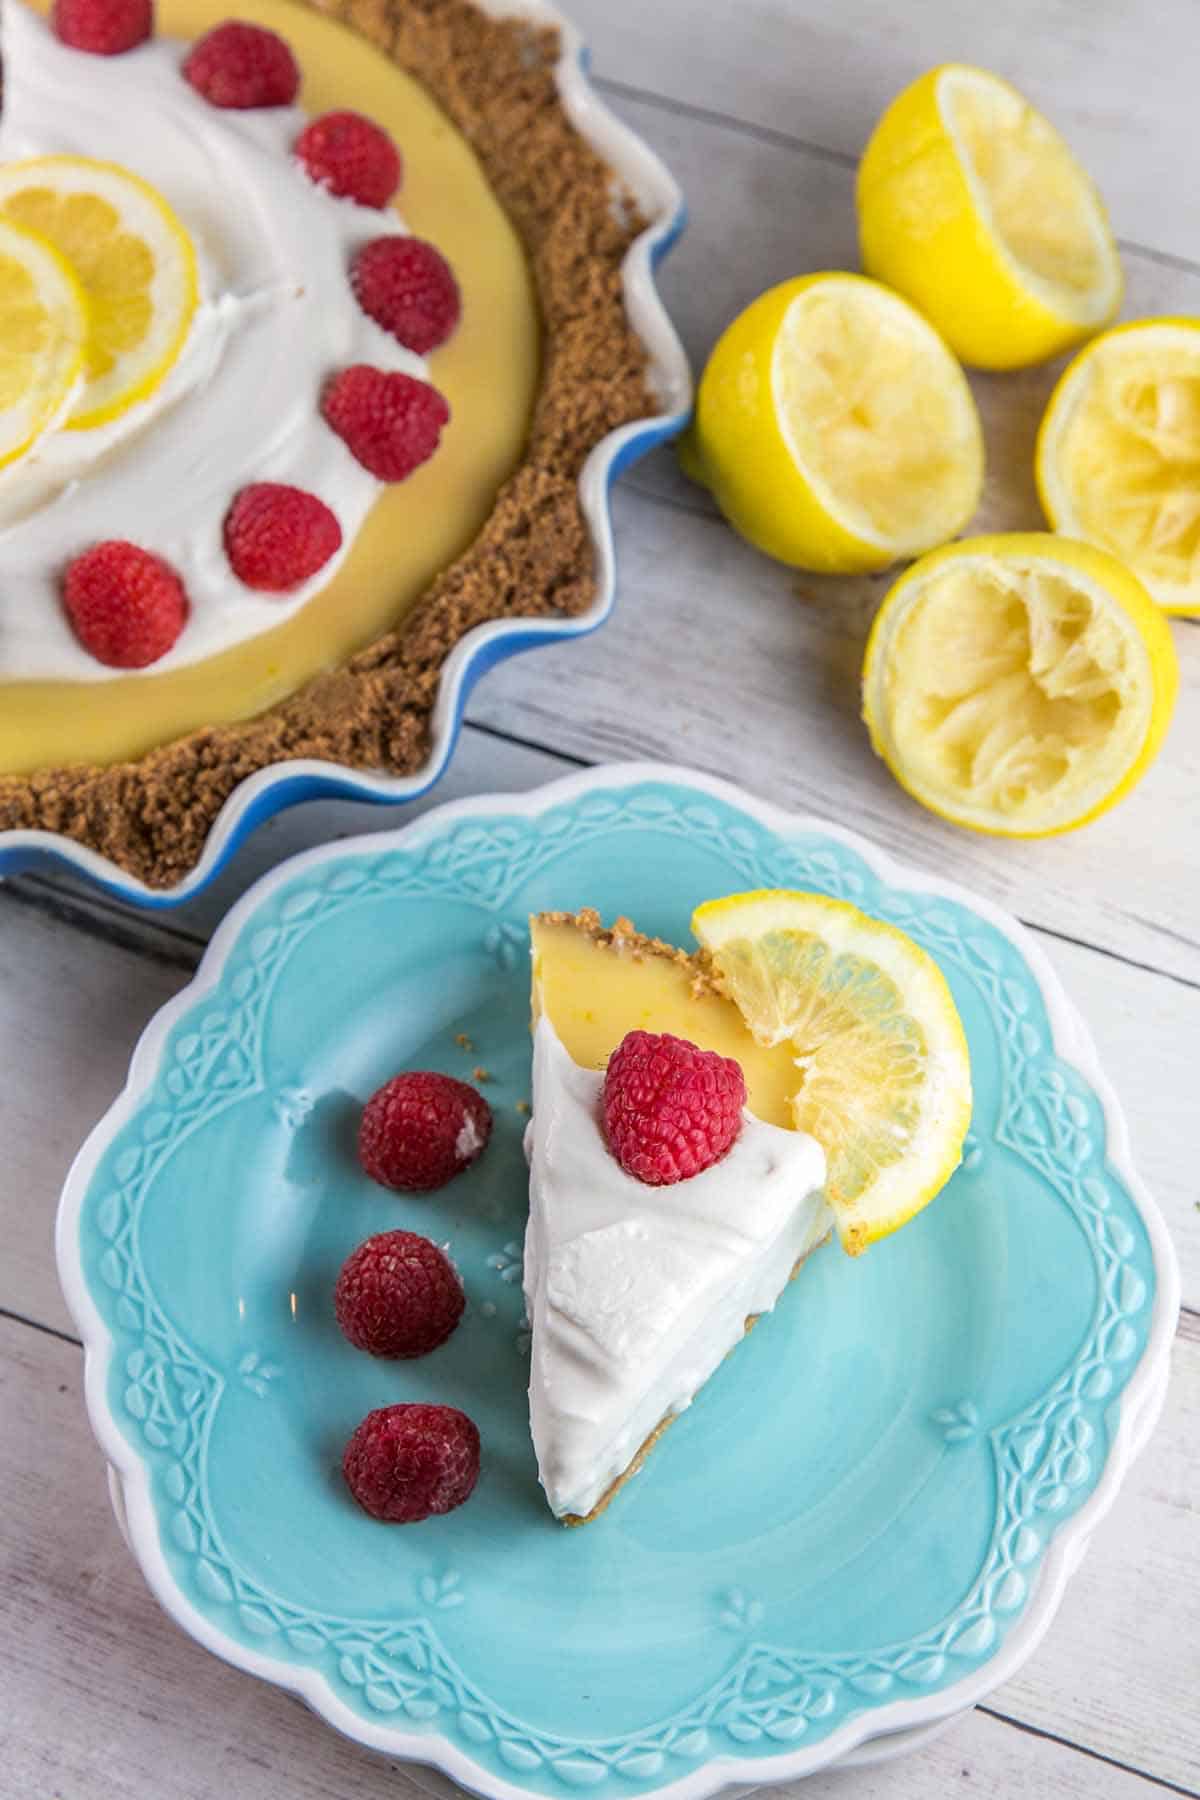 Lemon Pie: Silky smooth and sweet-tart, this easy make-ahead lemon pie is the perfect spring and summer dessert. Only 3 ingredients for a delicious baked lemon custard! {Bunsen Burner Bakery} #pie #lemonpie #easydesserts